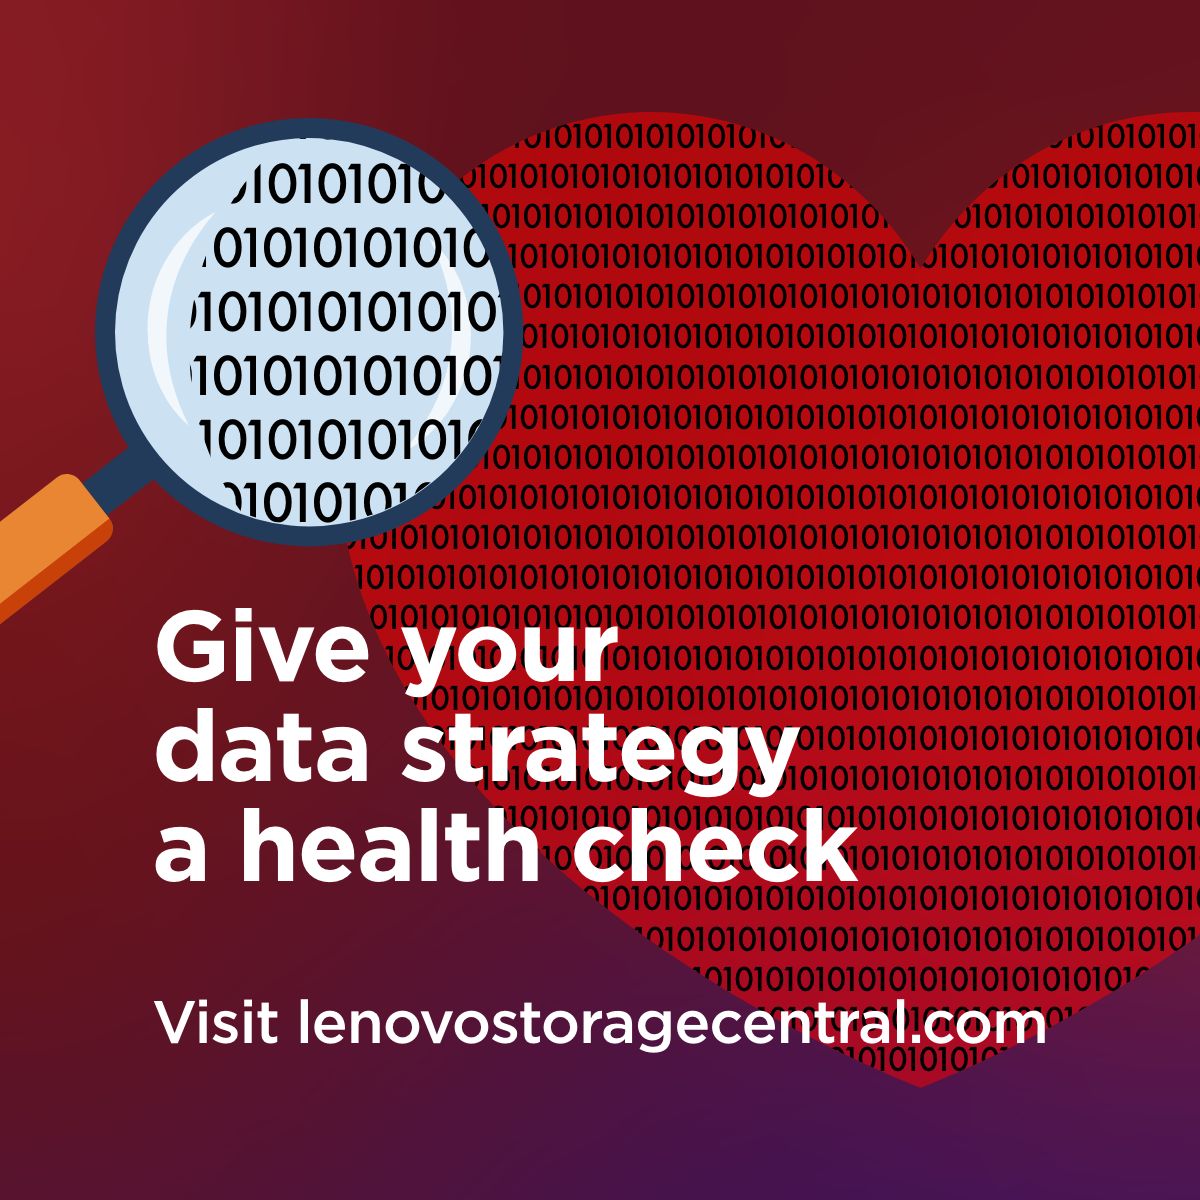 Enhancing data-driven innovations and gaining a competitive edge requires an effective data strategy. Evaluate yours by taking Lenovo’s Data Health Check quiz available here > bit.ly/3JO64Im Paid partnership with @Lenovodc. #DataStrategy